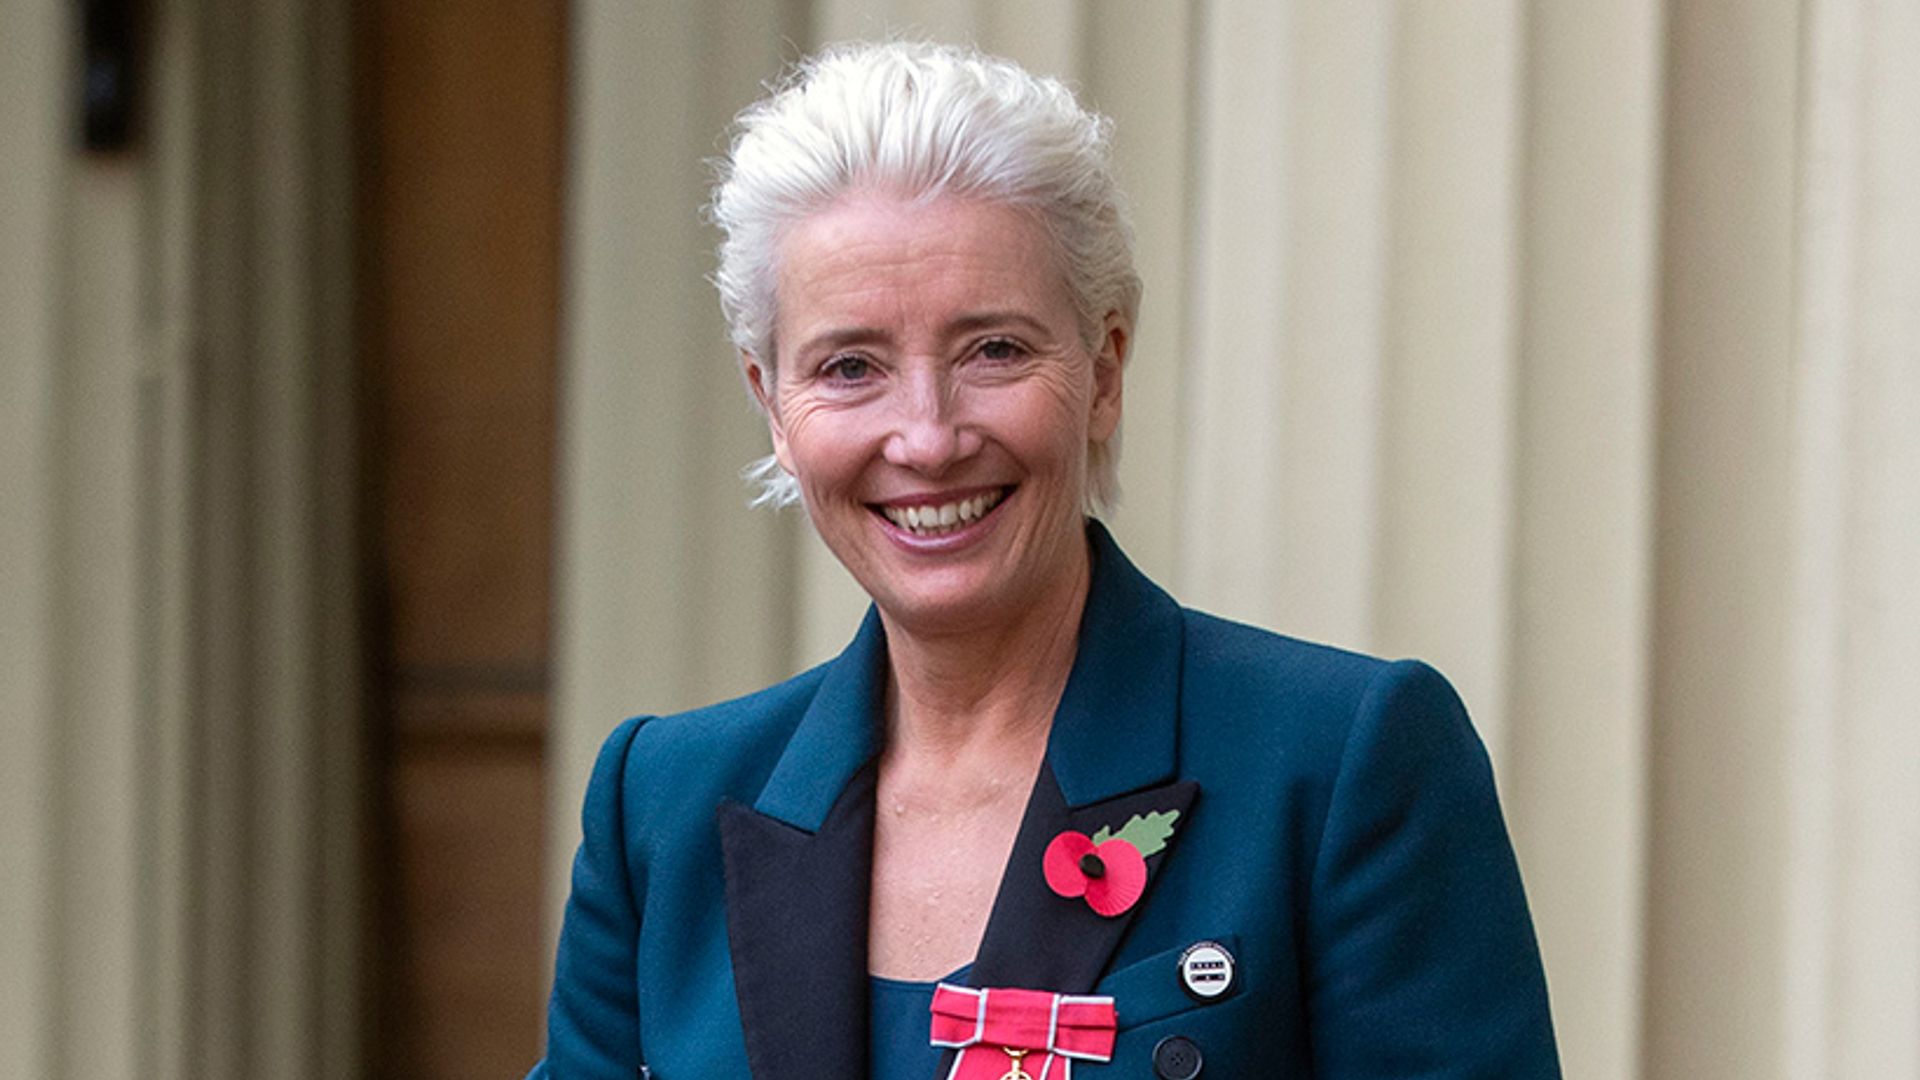 The internet reacts to Emma Thompson wearing trainers to meet royalty